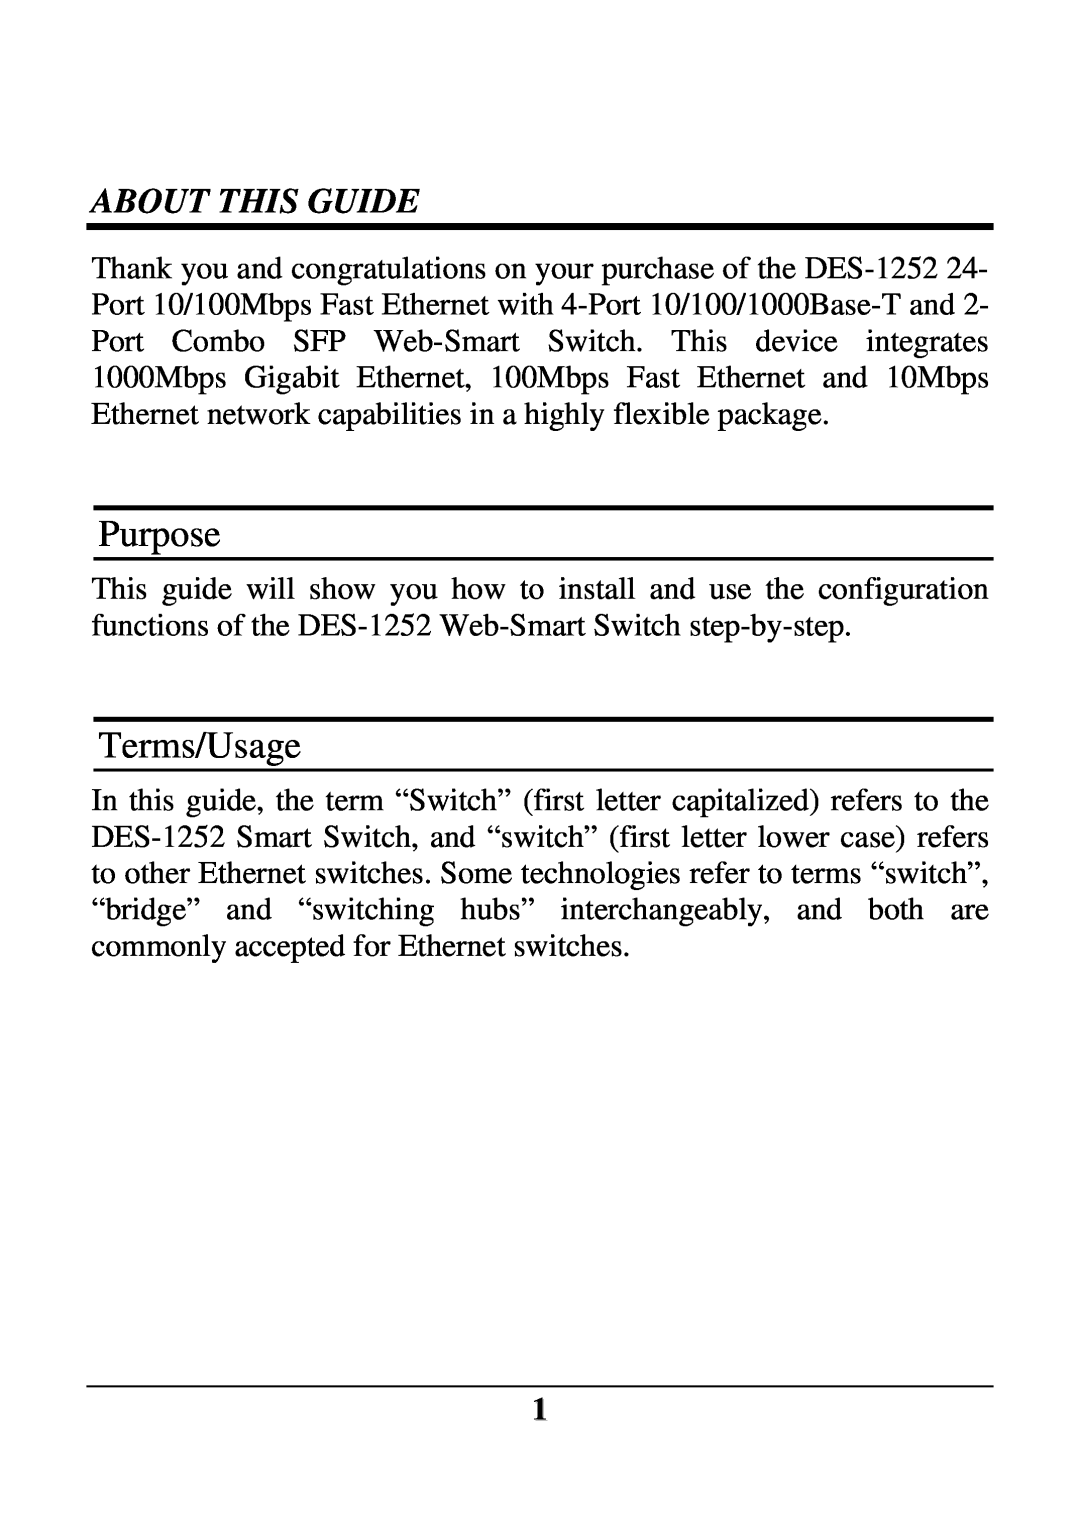 D-Link DES-1252 user manual Purpose, Terms/Usage, About This Guide 